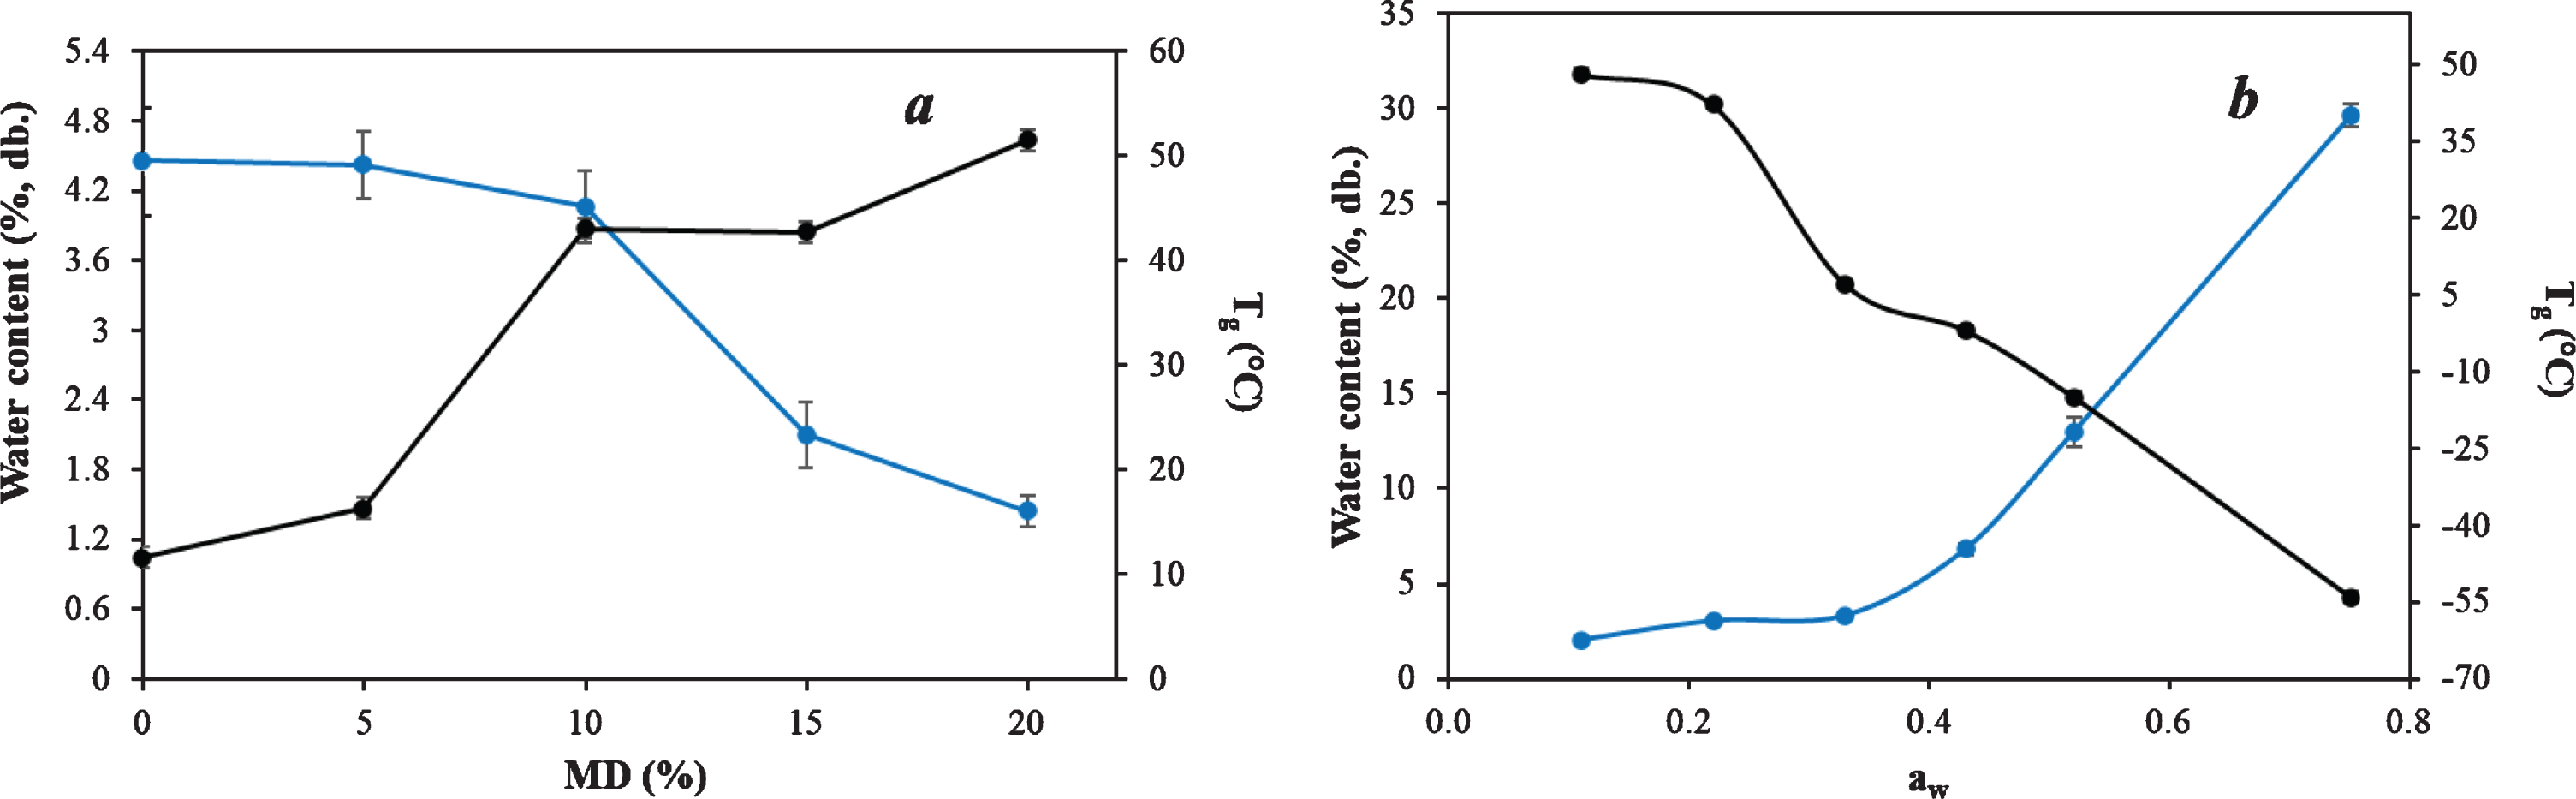 Water content (blue line) and glass transition temperature (black line) values for maltodextrin formulation study (a) and elderberry freeze-dried powder sorption behavior (b).